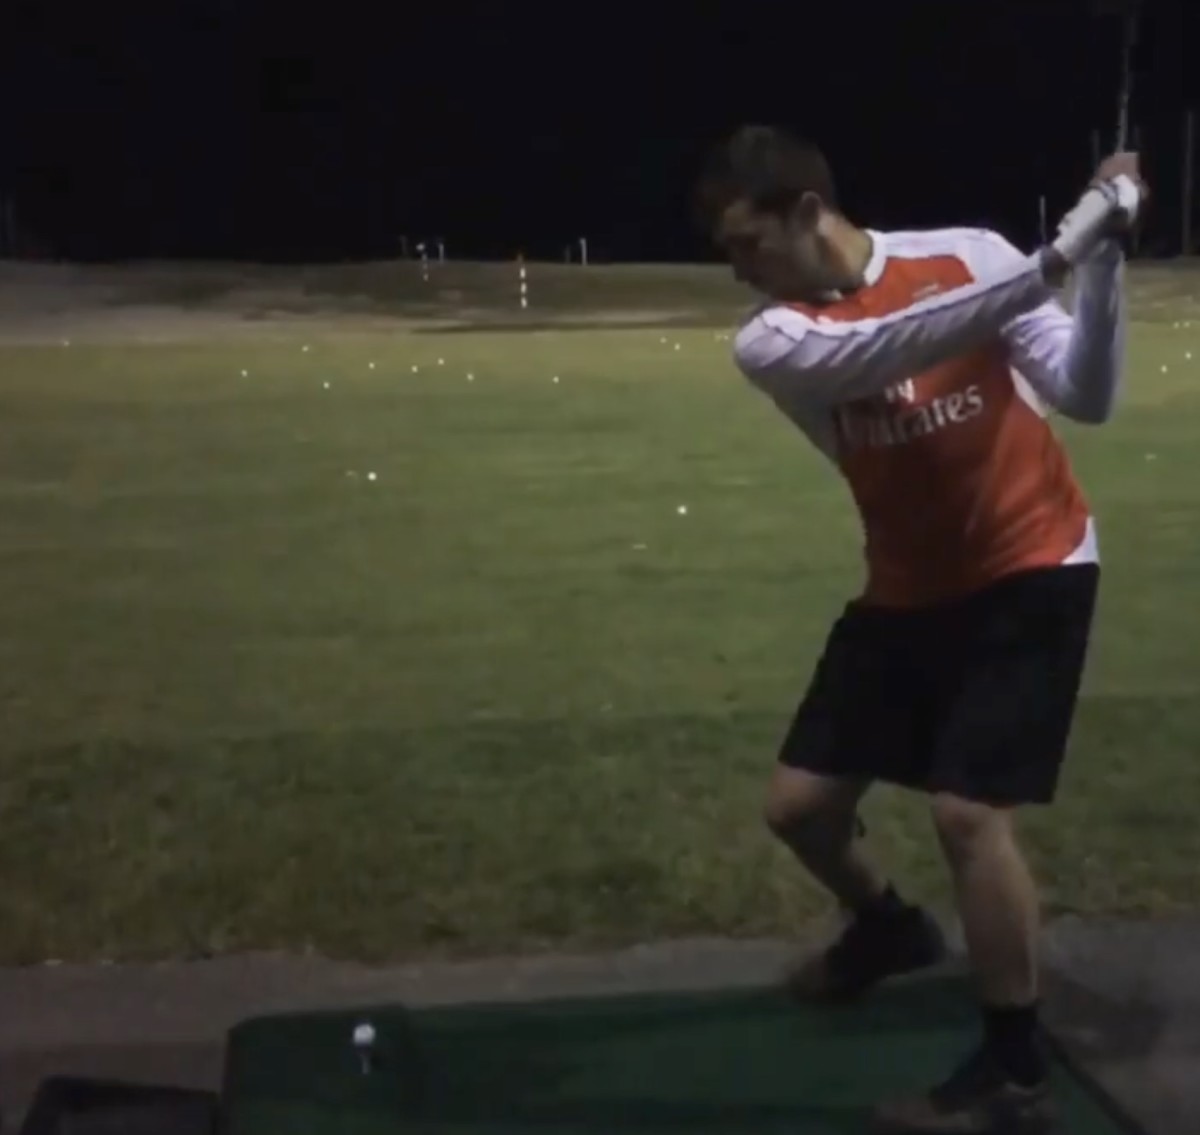 Matt Turner pictured playing golf while wearing an Arsenal jersey in 2016